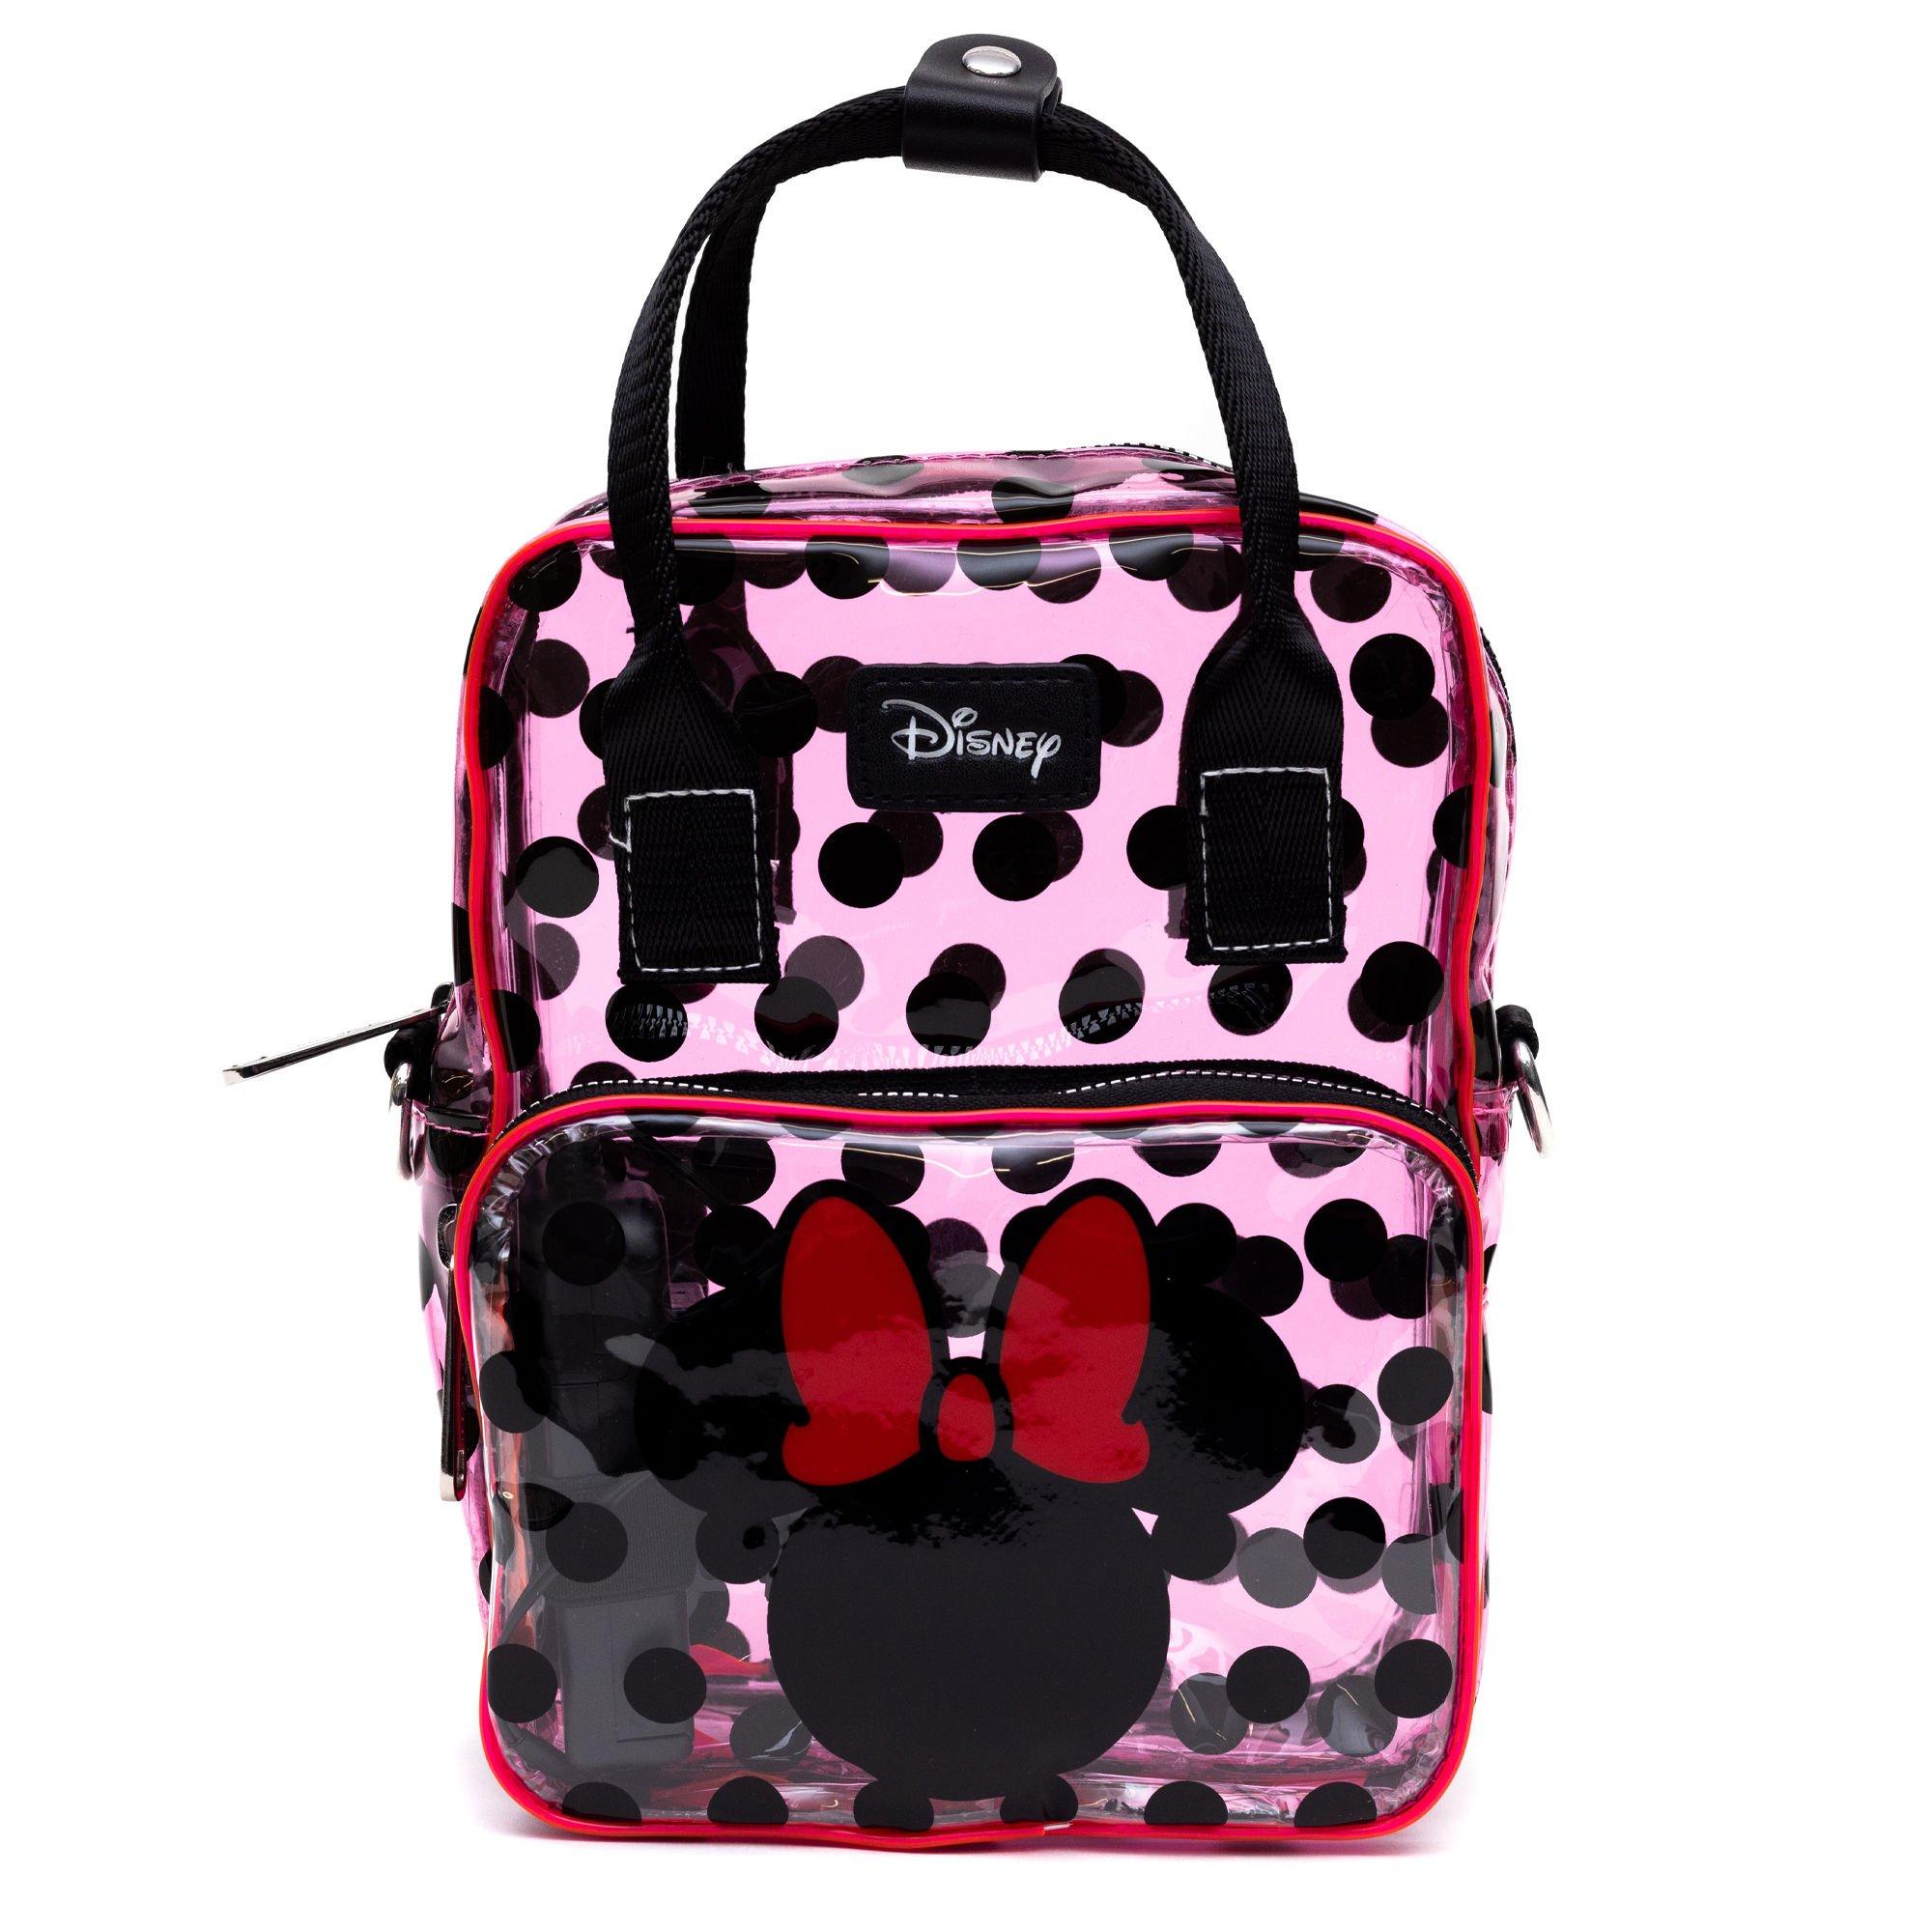 Buckle-Down Disney Minnie Mouse Crossbody Bag with Light Up Piping Edge Two Compartments and Handle, Size: One Size, Buckle Down